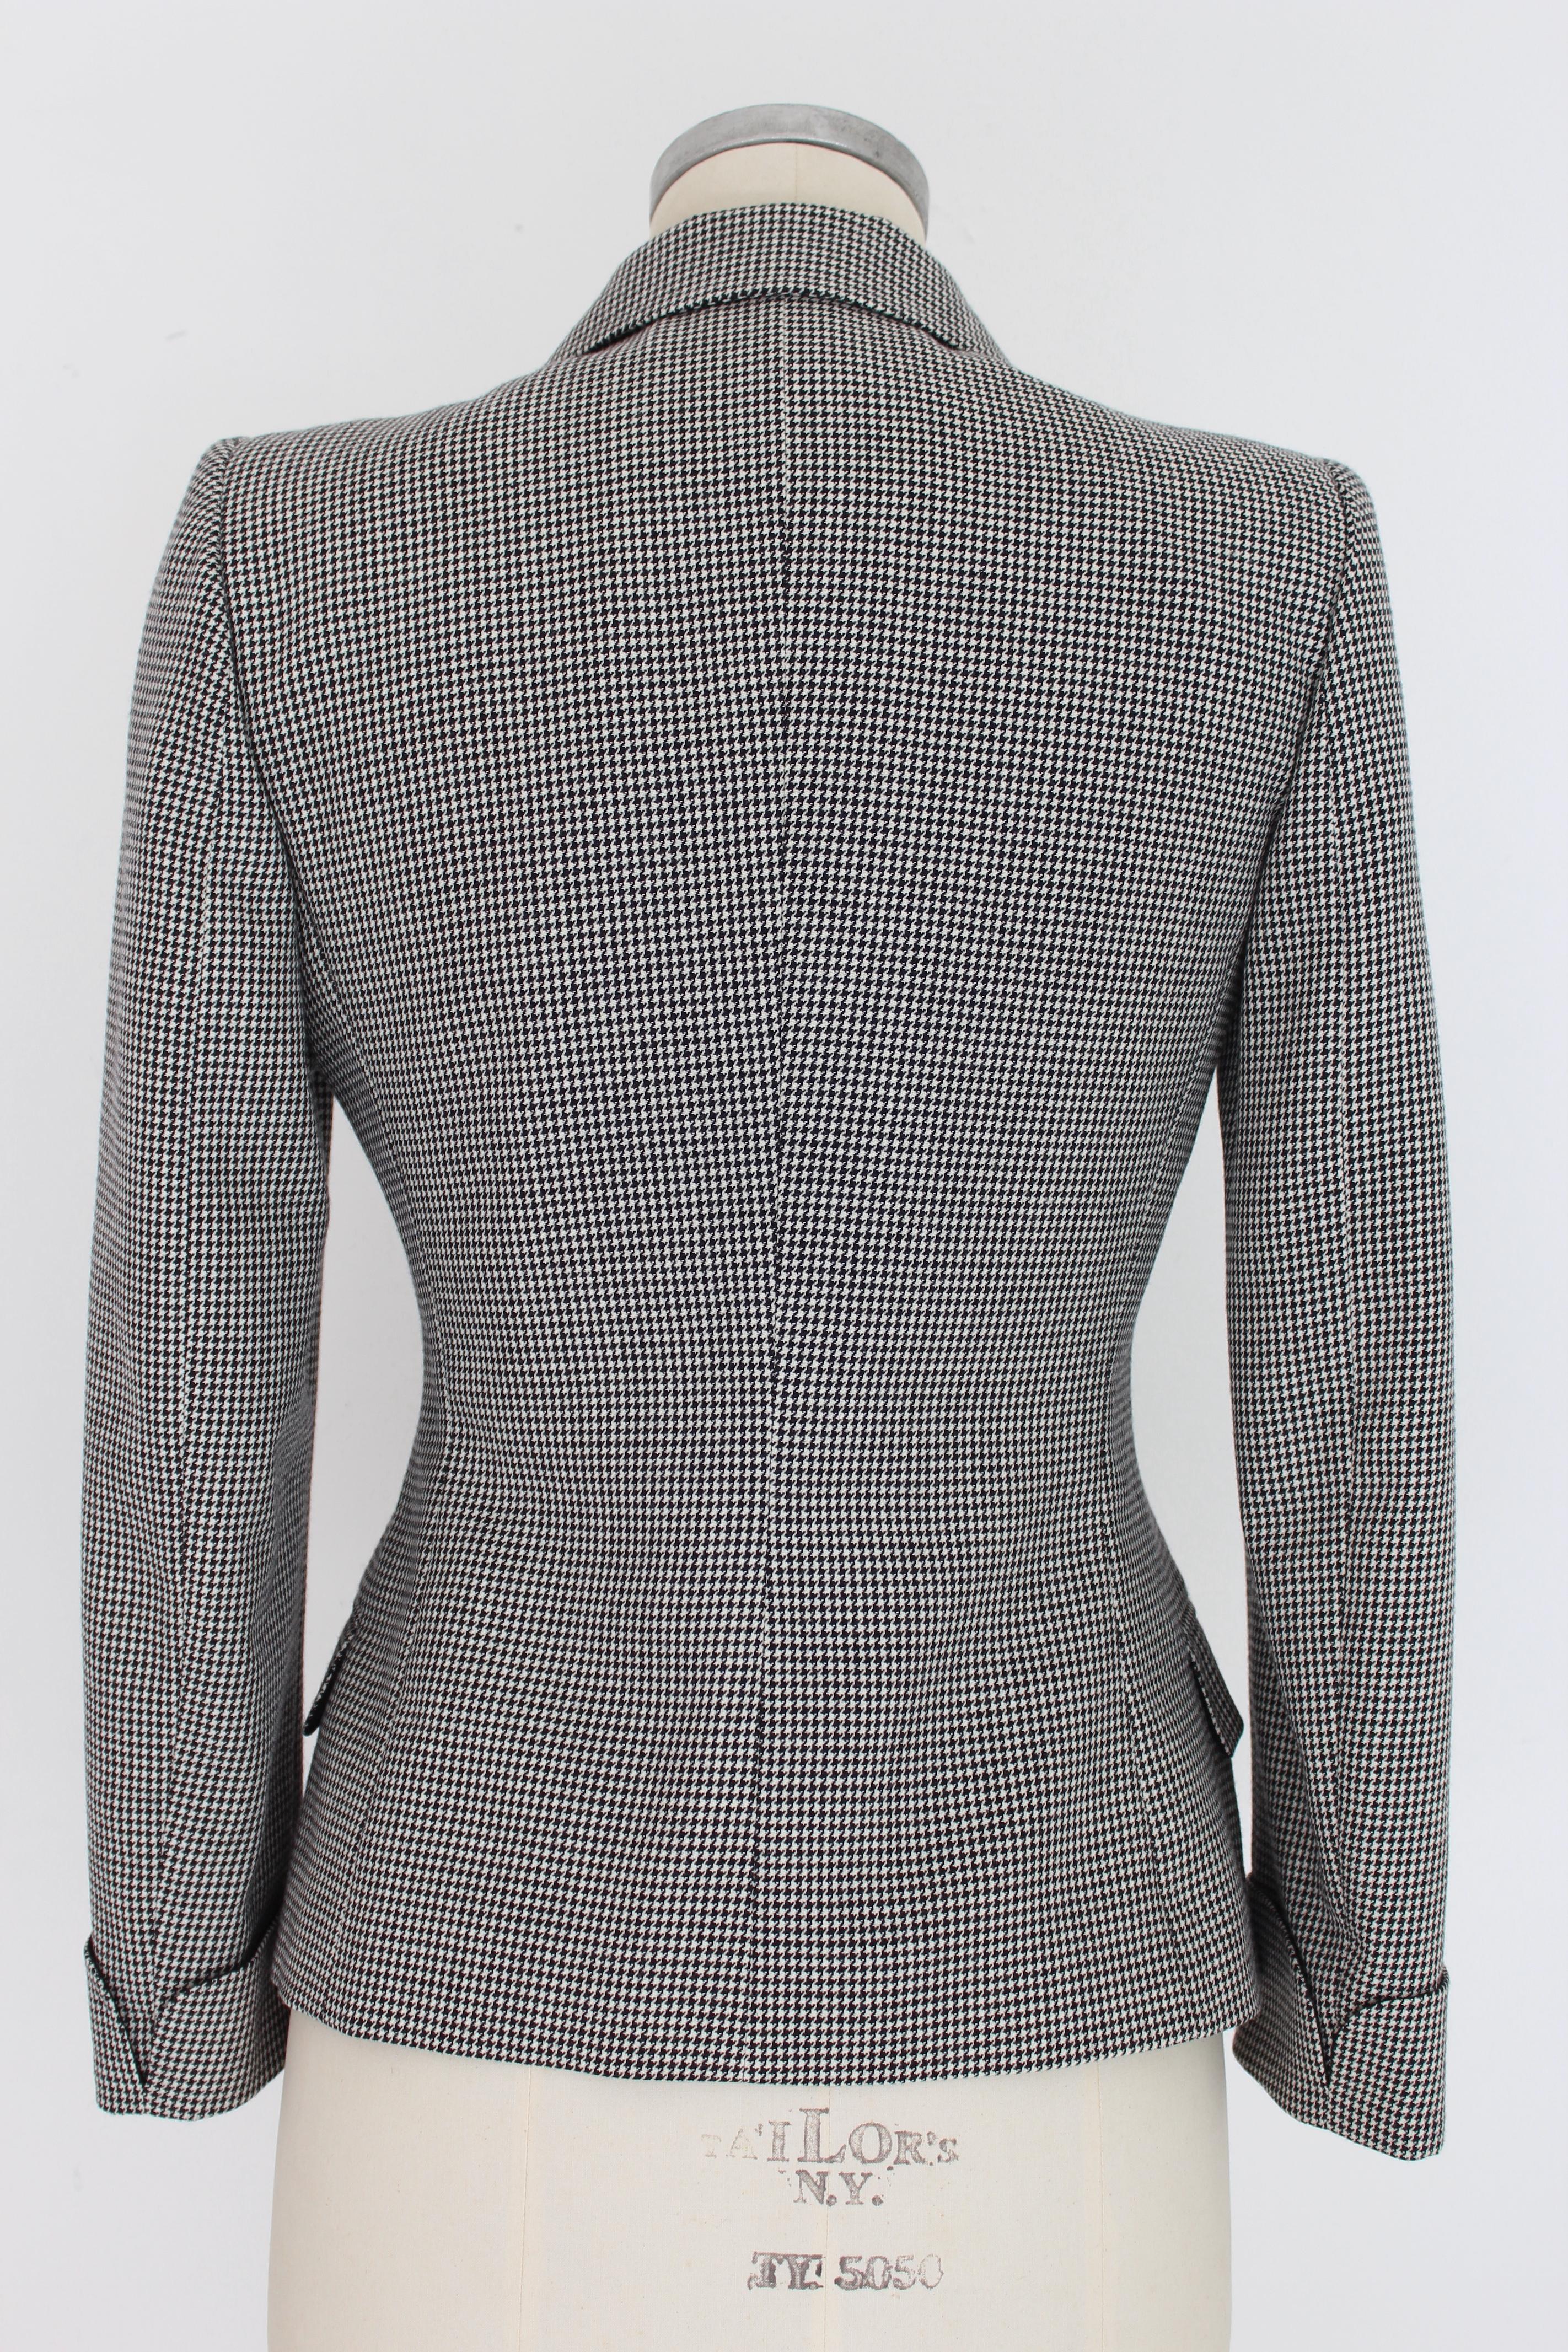 Les Copains 90s vintage women's jacket. Short blazer at the waist, fitted. Black and white color, checked pattern. 100% wool fabric, lined inside, there are applied shoulder straps. Made in Italy.

Condition: Excellent

Item used few times, it